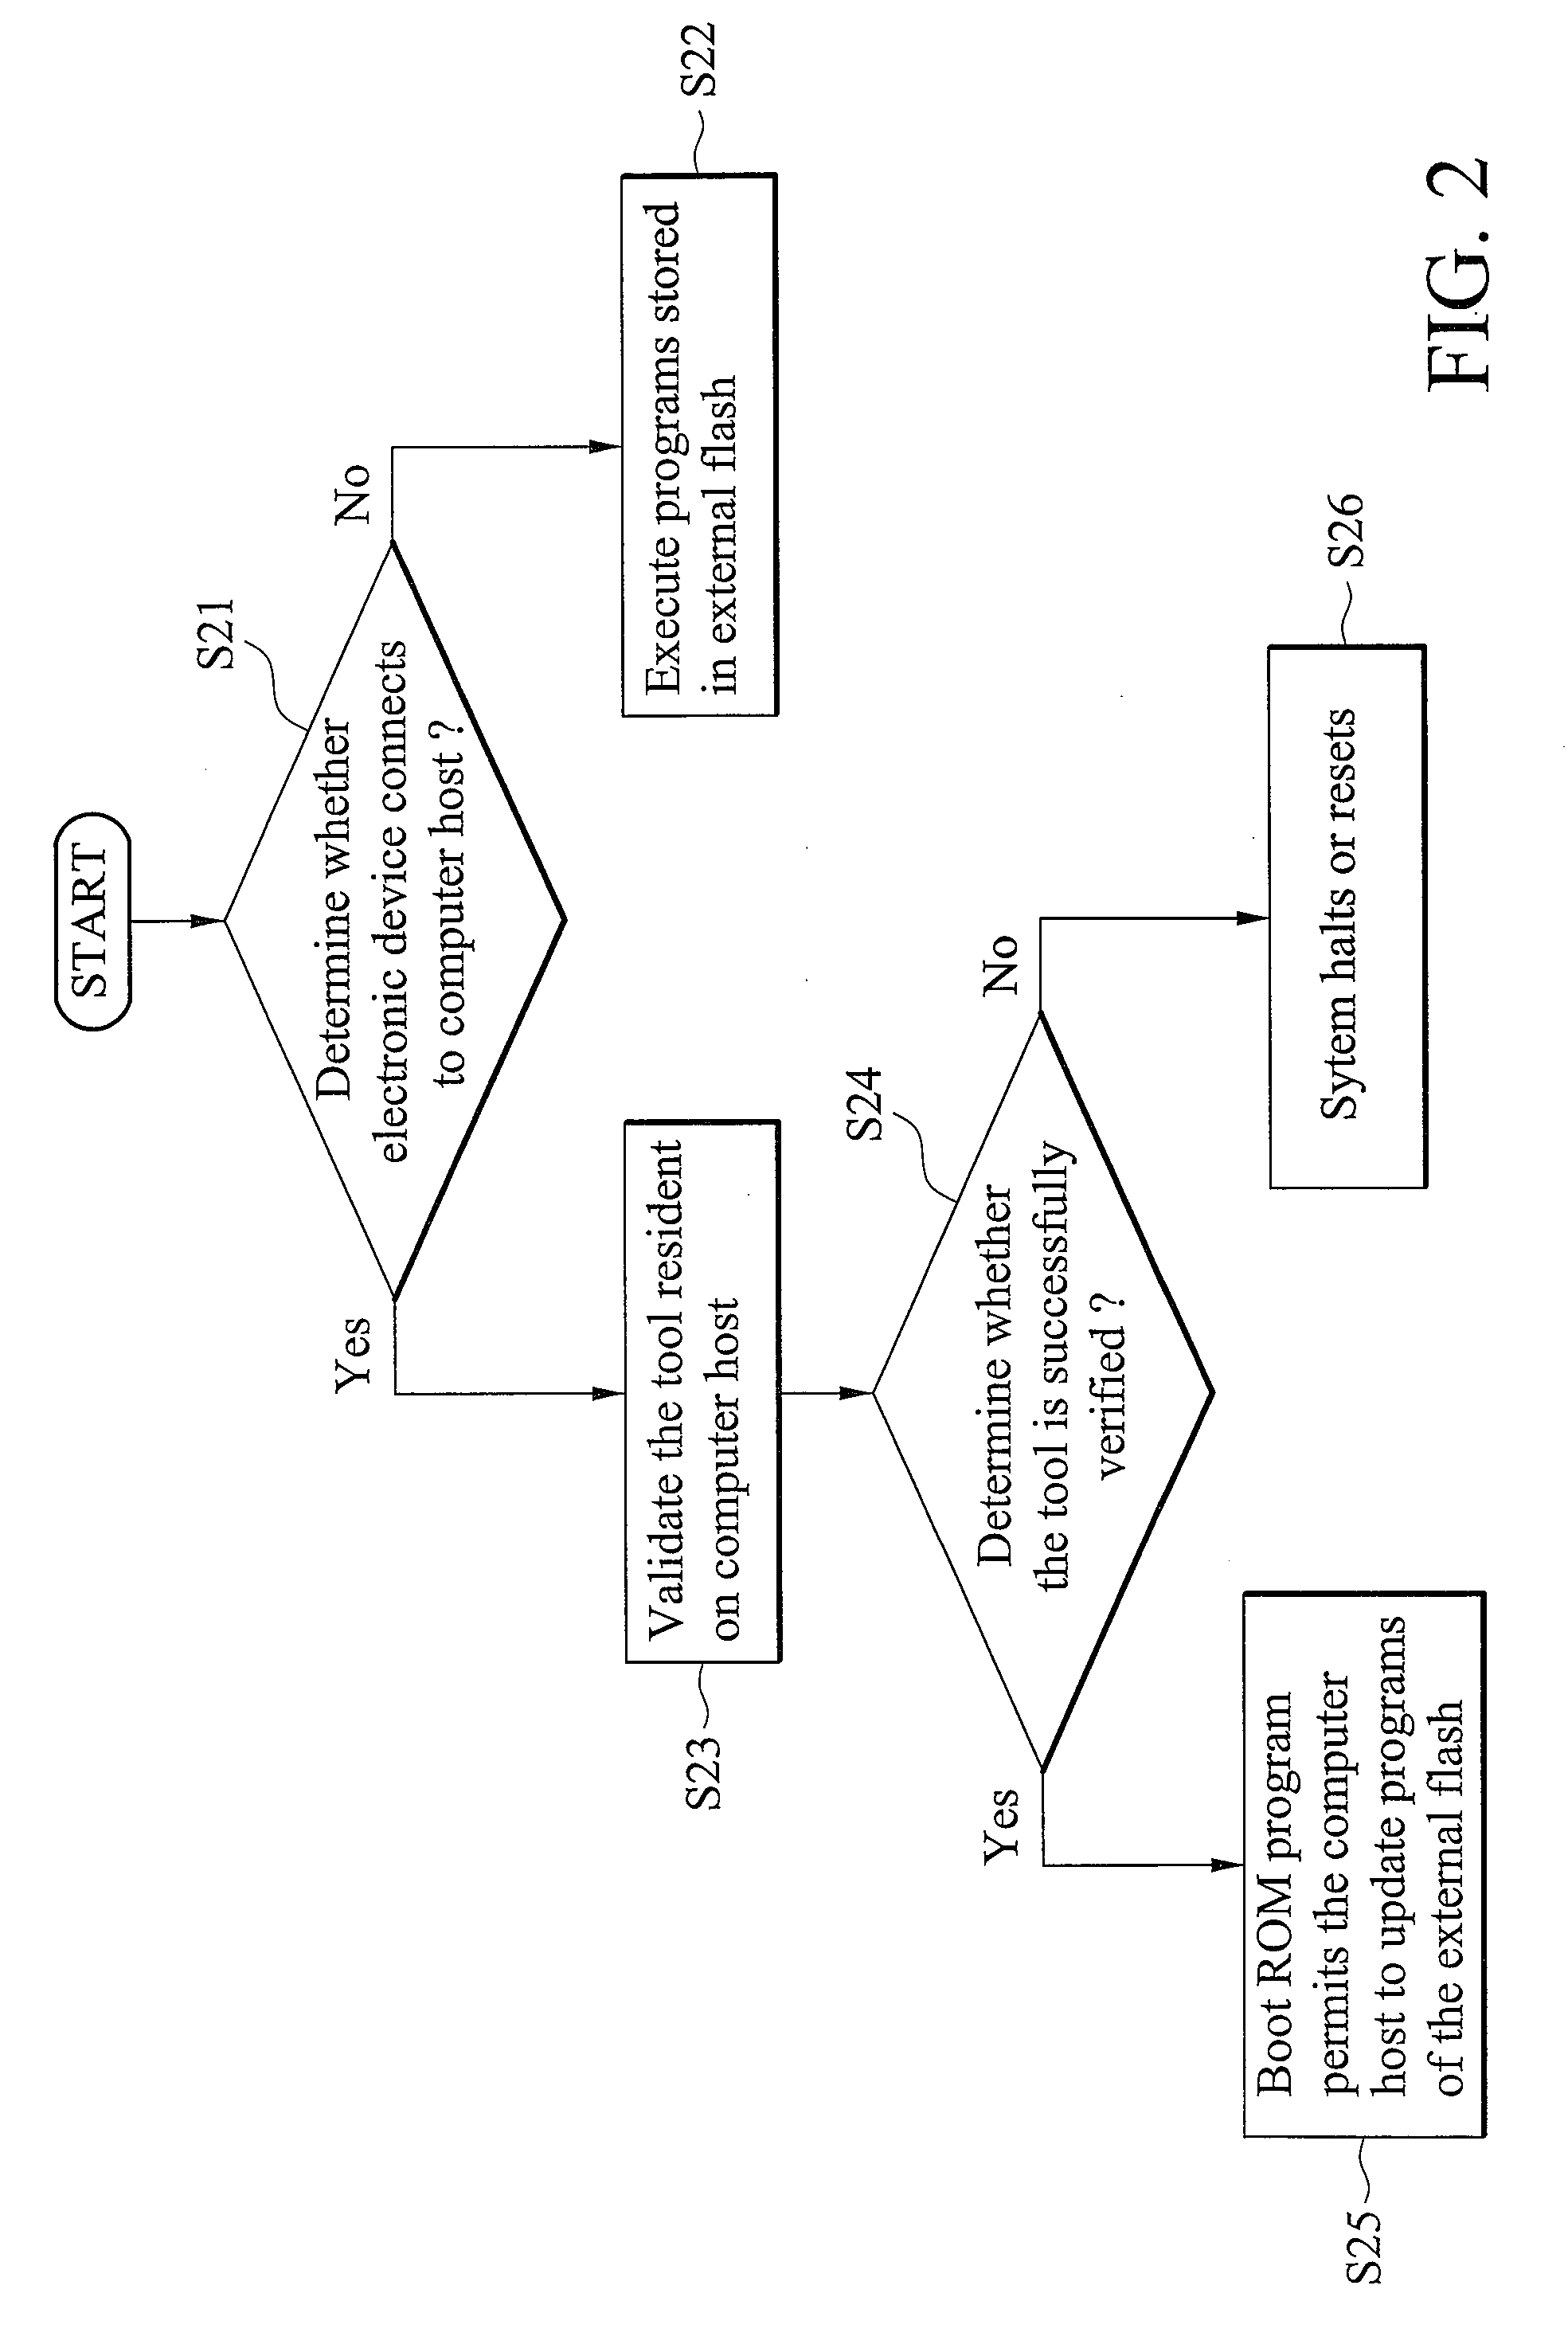 Methods for program verification and apparatuses using the same